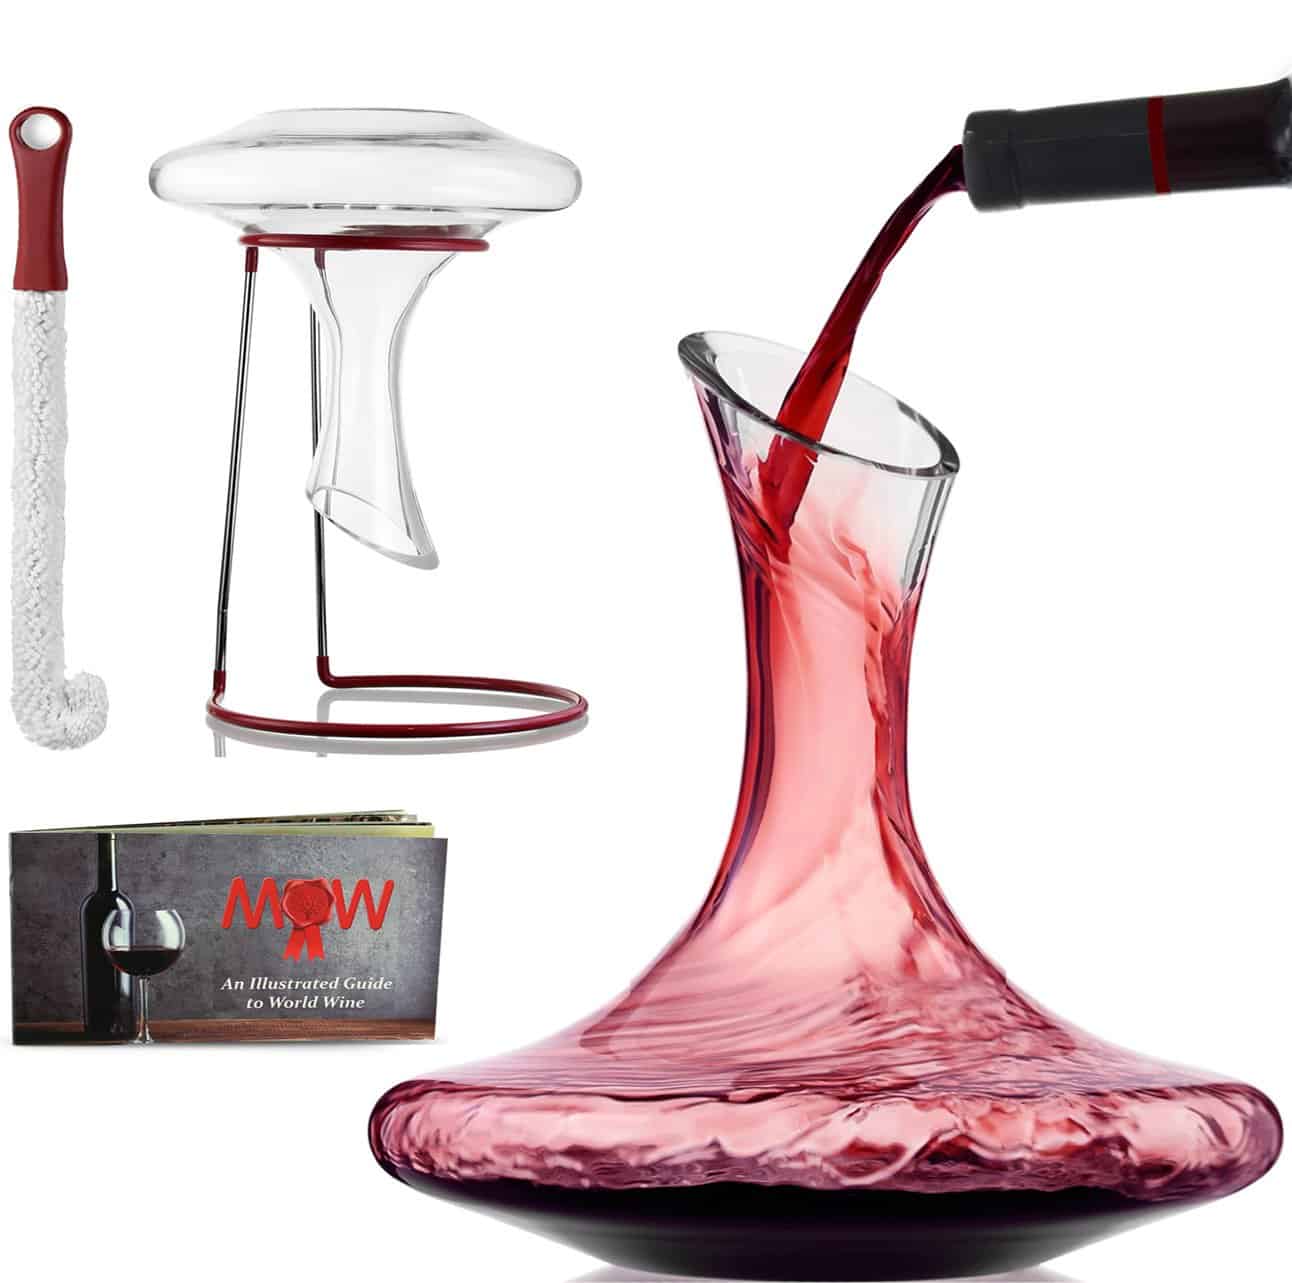 Mixologist World Is Your Source For The Best Bar Tools